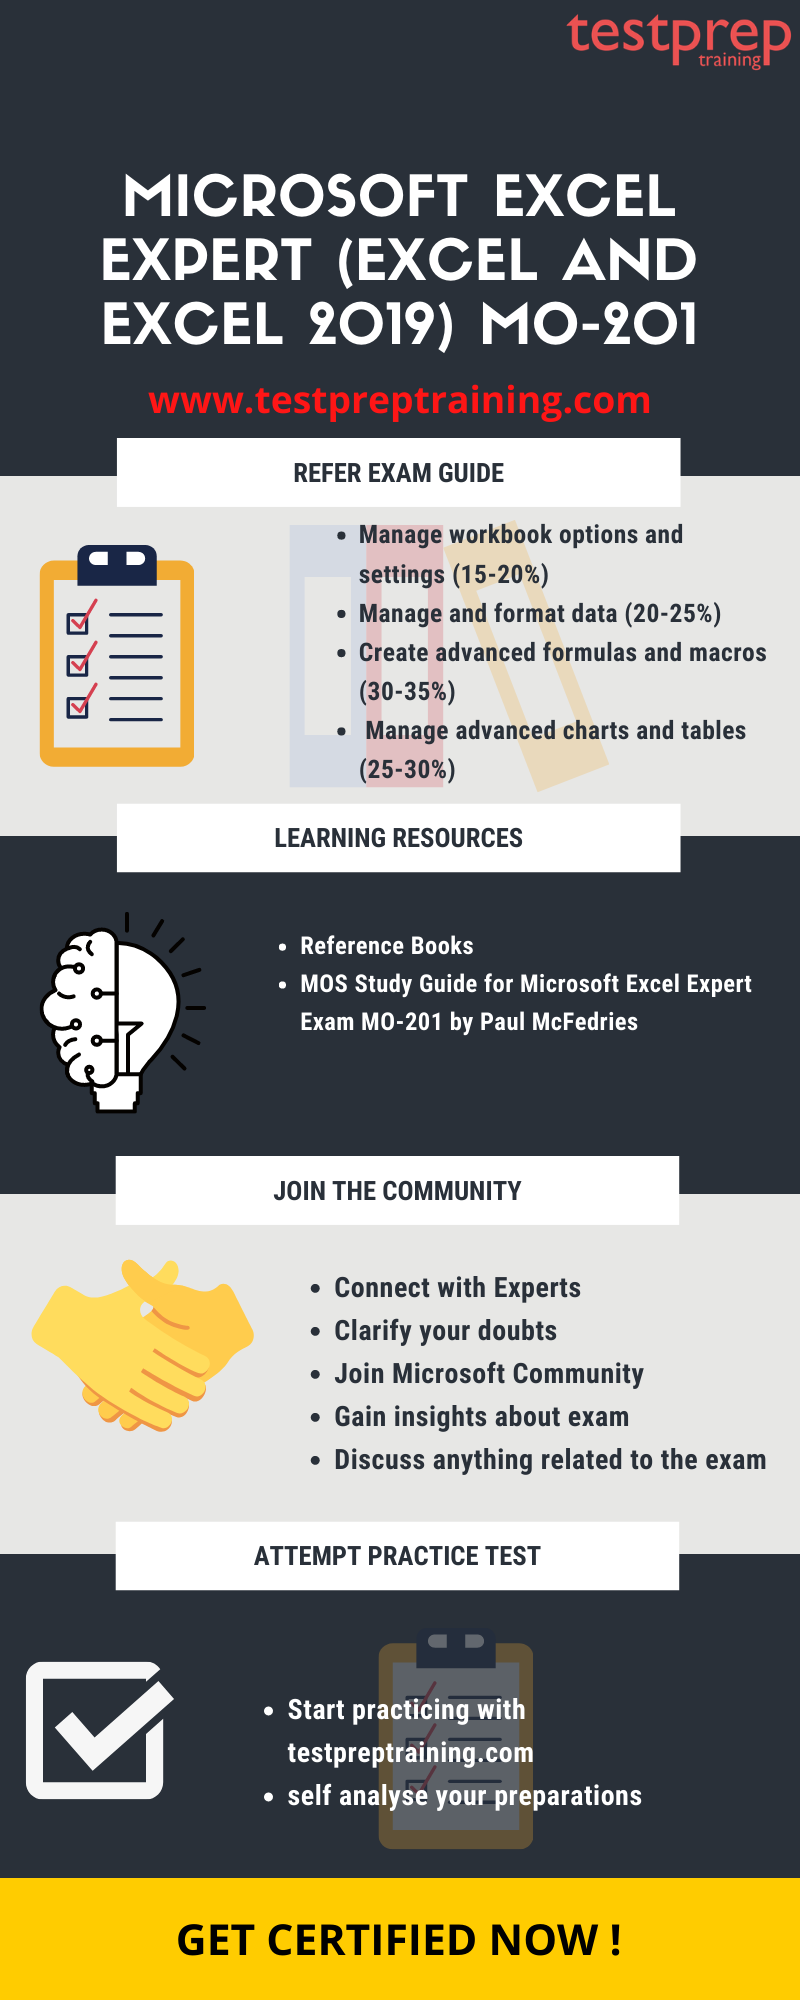 Preparatory Guide for Microsoft Excel Expert (Excel and Excel 2019) MO-201